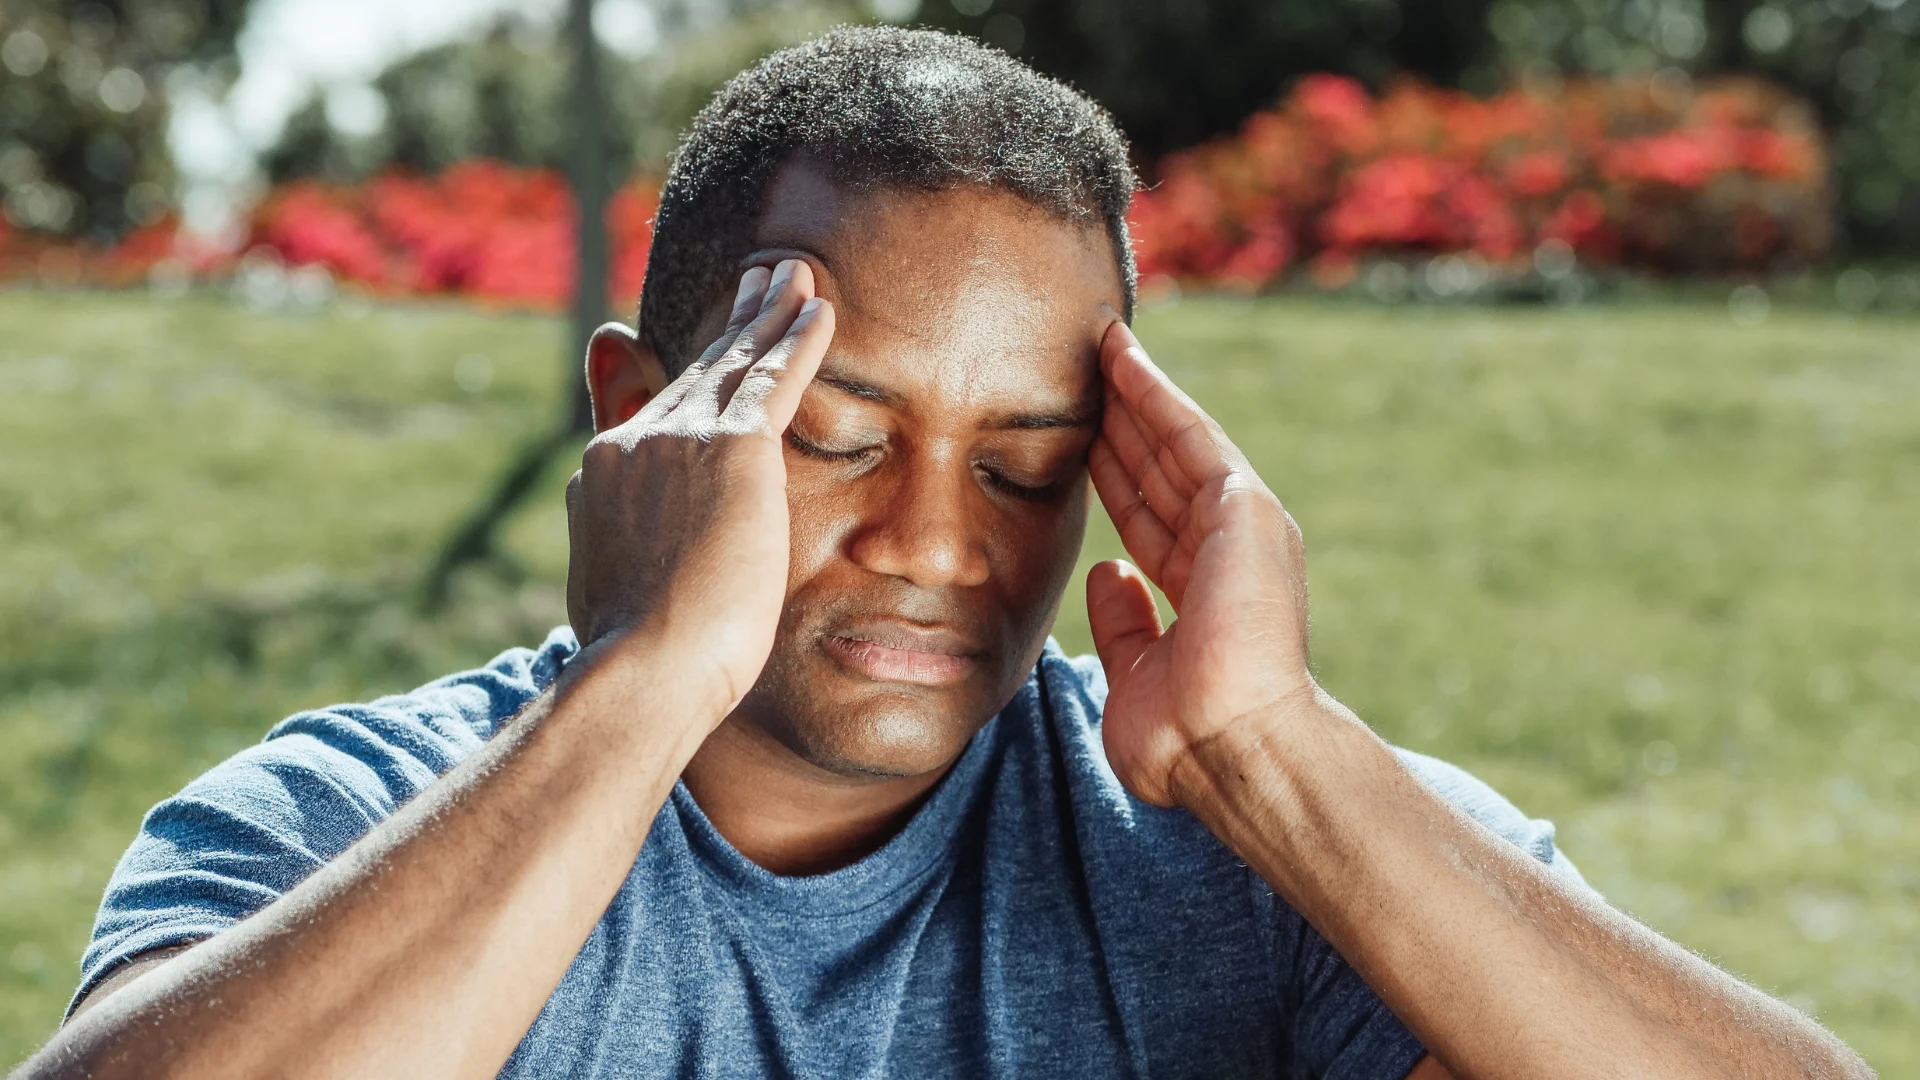 New research finds a link between hot weather and migraines